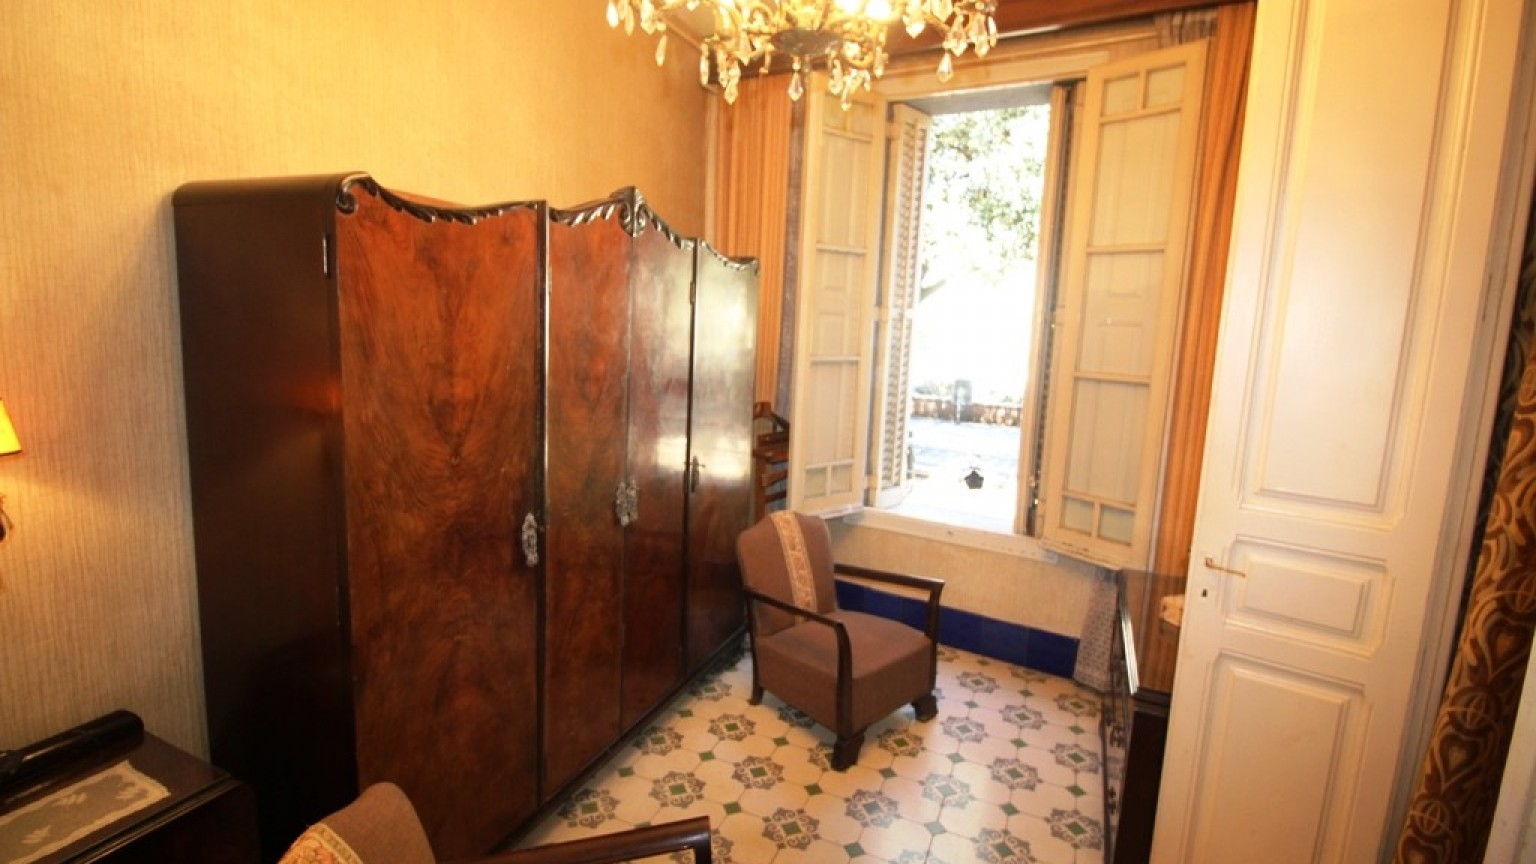 House for sale,  in the city center with terrace and private garden of 60m².